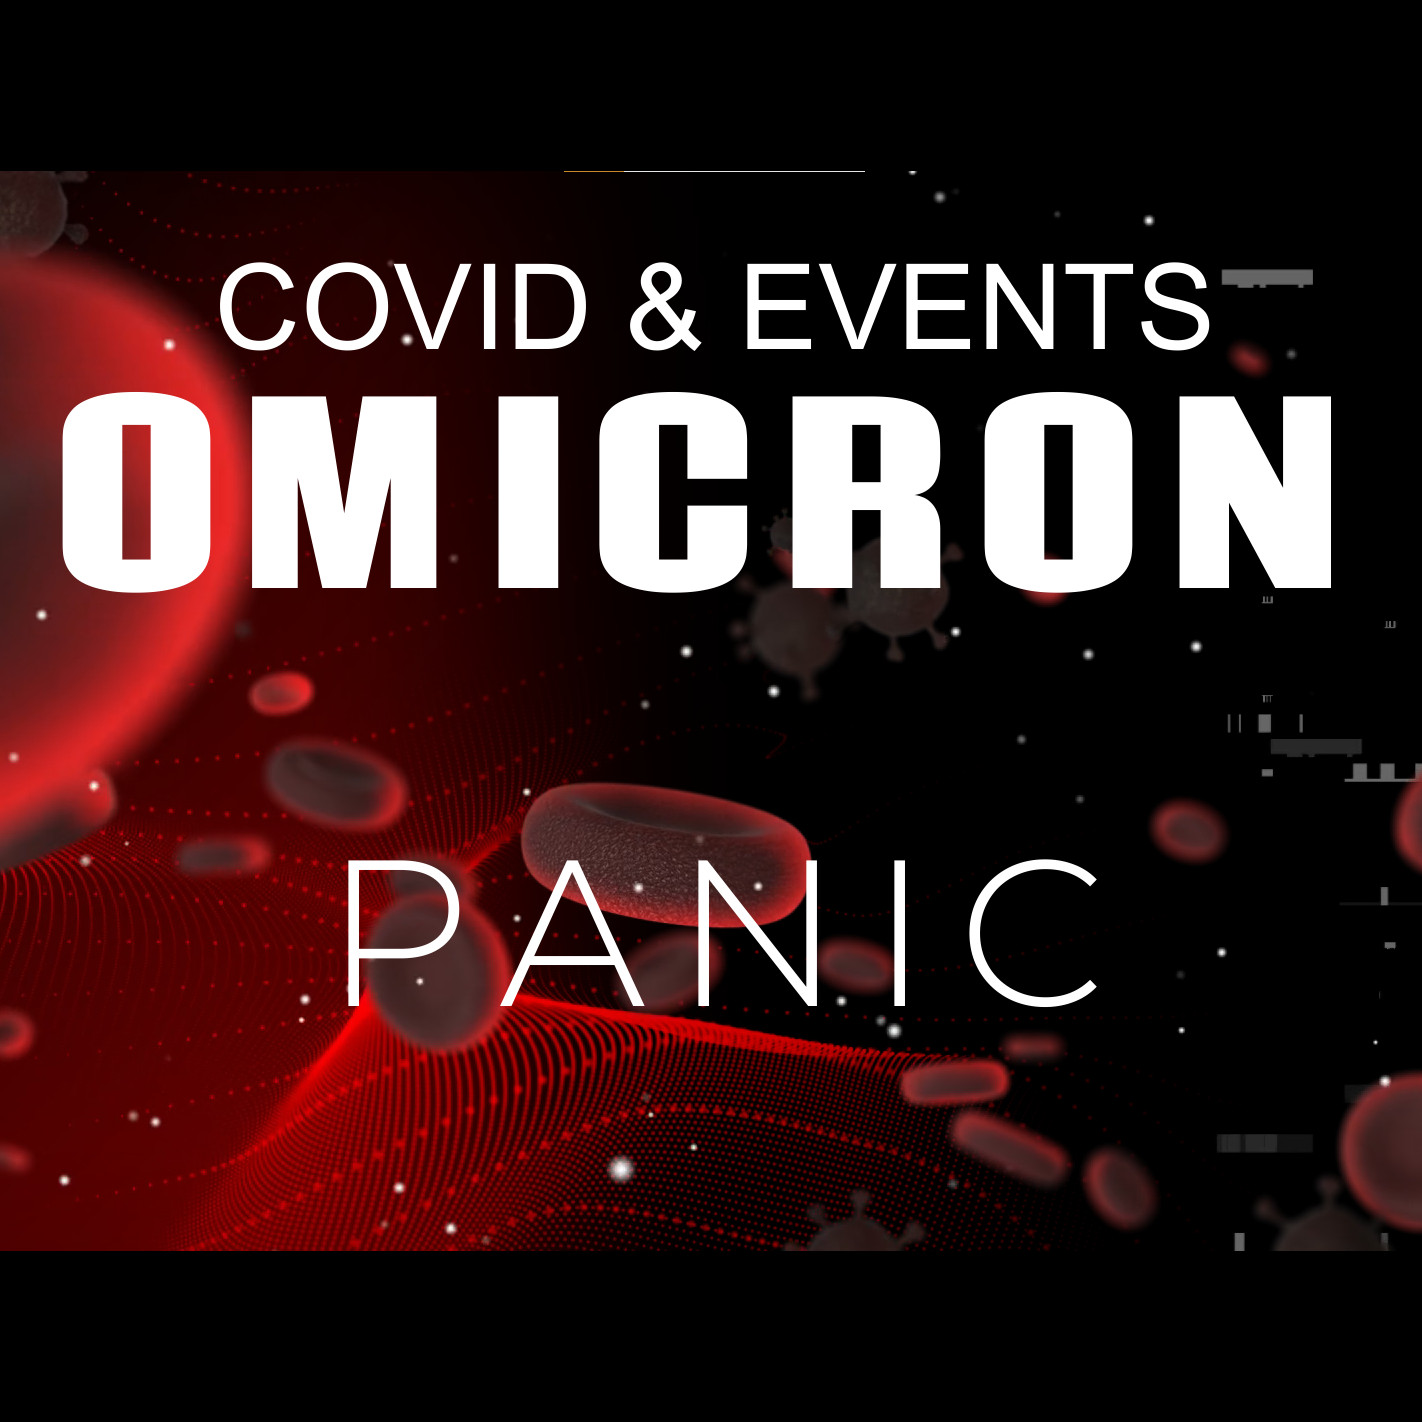 Covid and Events: OMICRON PANIC